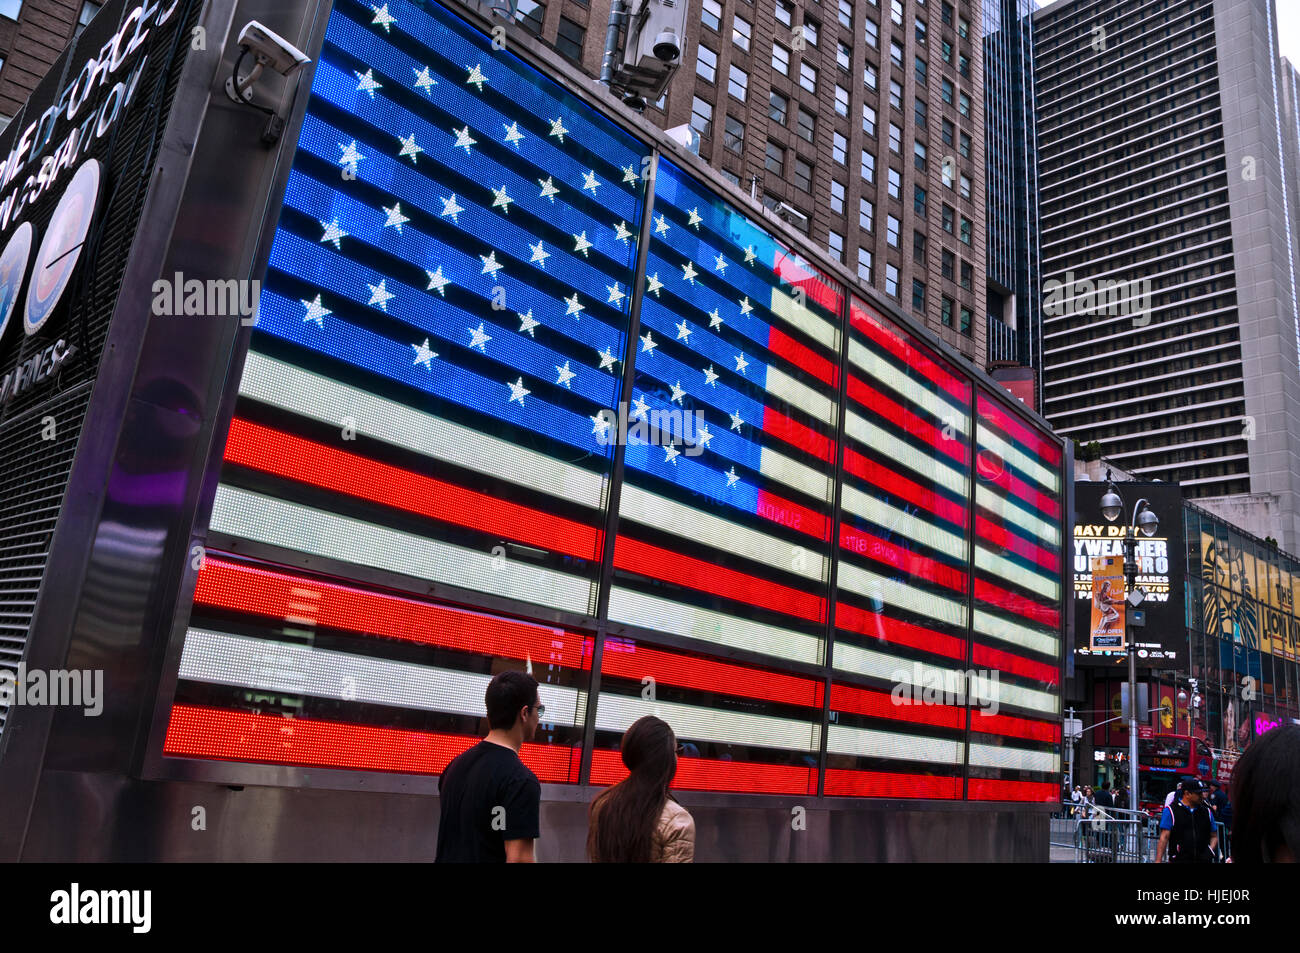 American flag in Times Square NYC Stock Photo